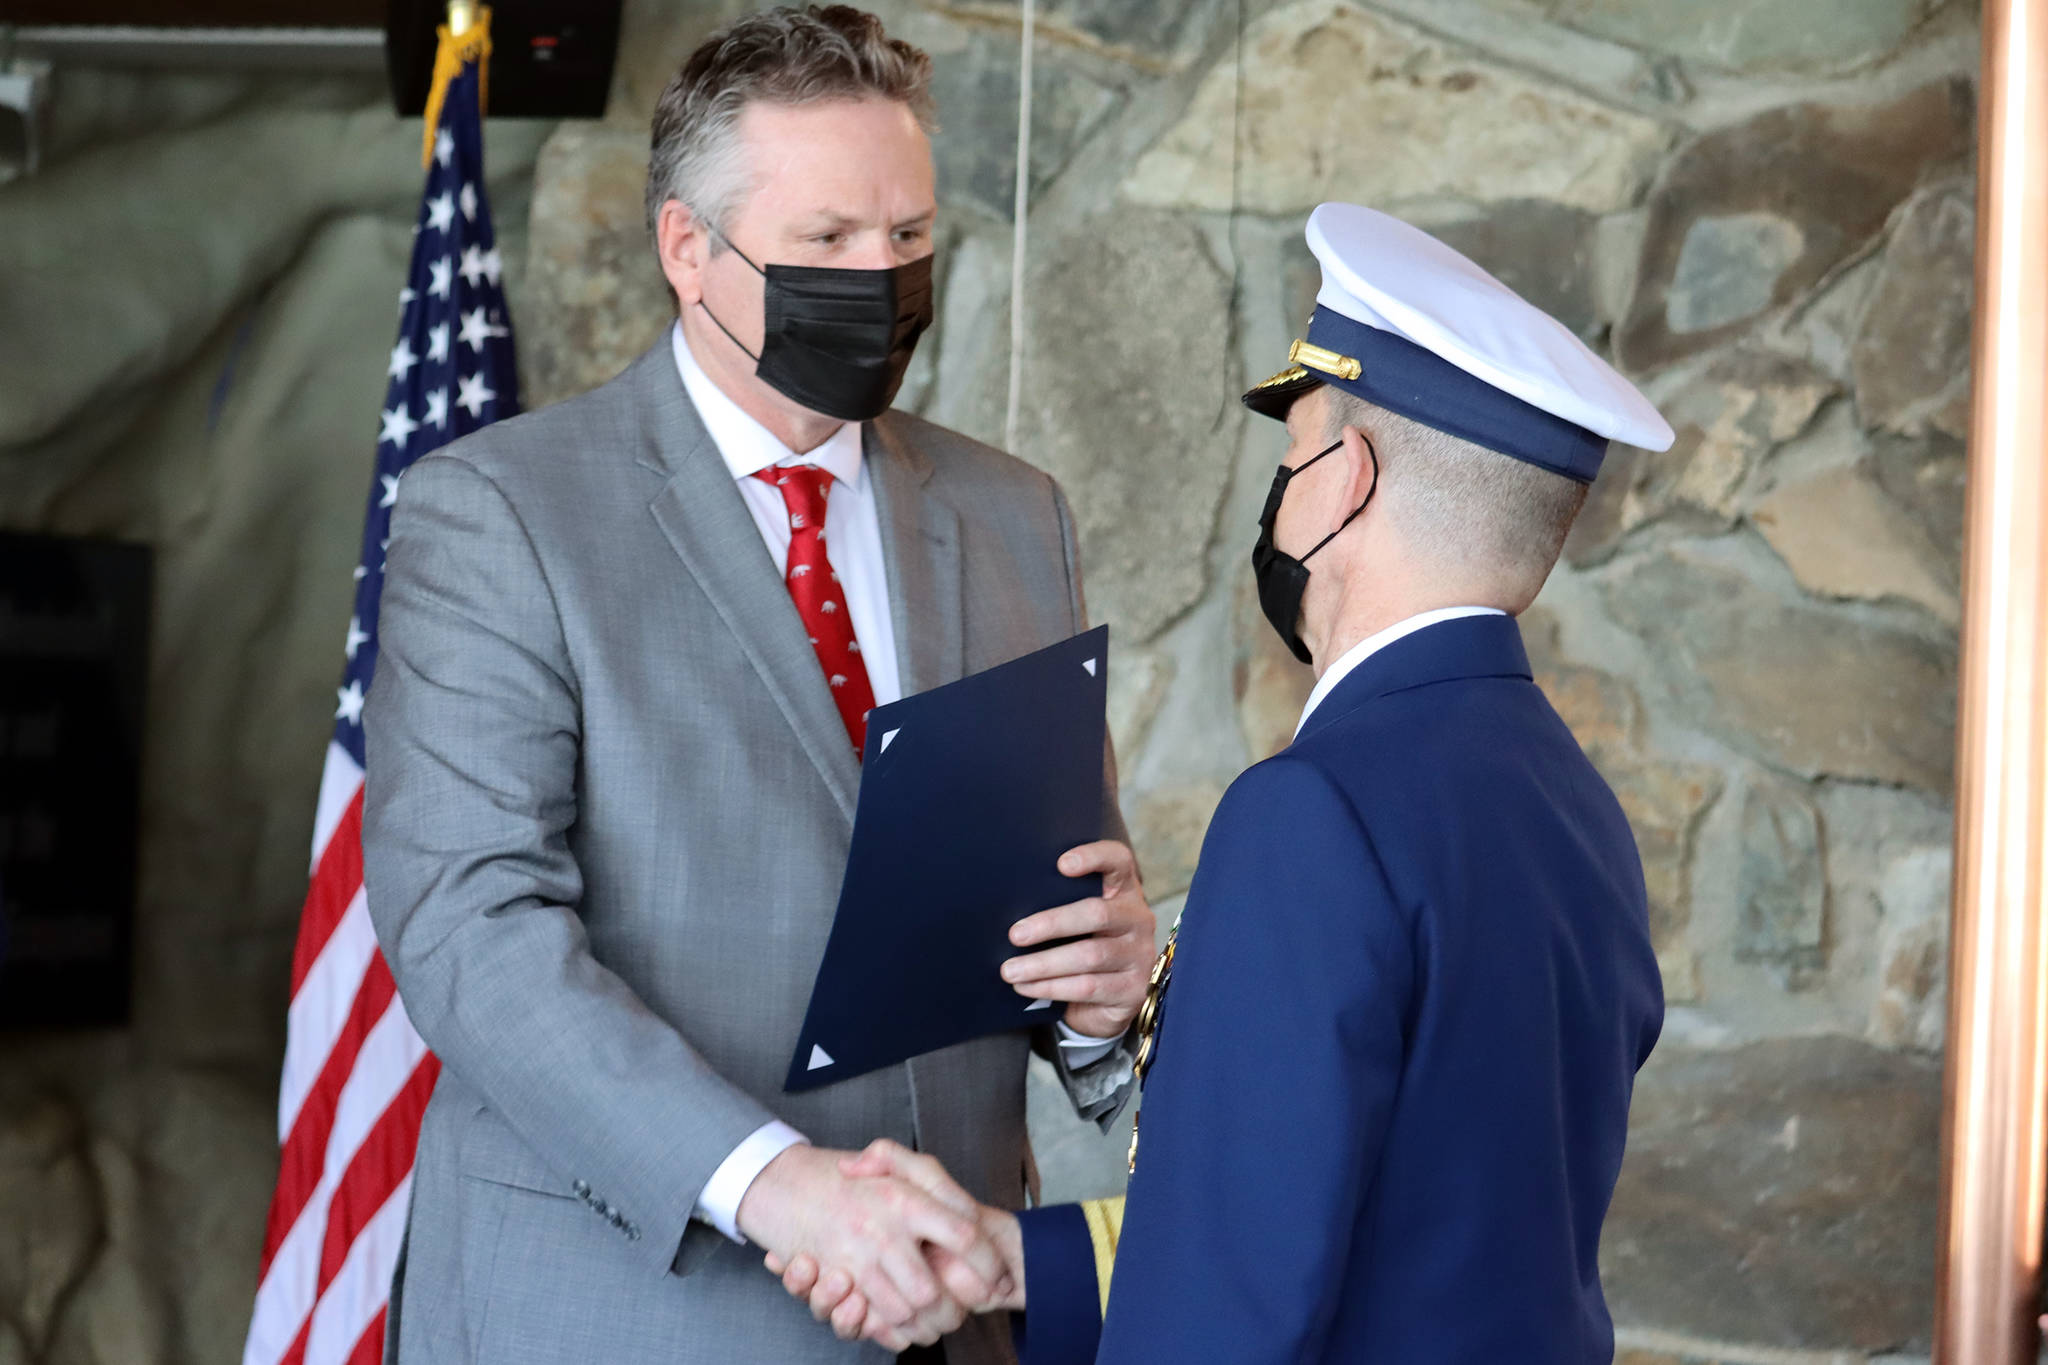 Gov. Mike Dunleavy shakes hands with Rear Adm. Matthew T. Bell Jr. during a Change of Command and retirement ceremony Friday, April 23, 2021 at Mendenhall Glacier Visitor Center. (Ben Hohenstatt / Juneau Empire)